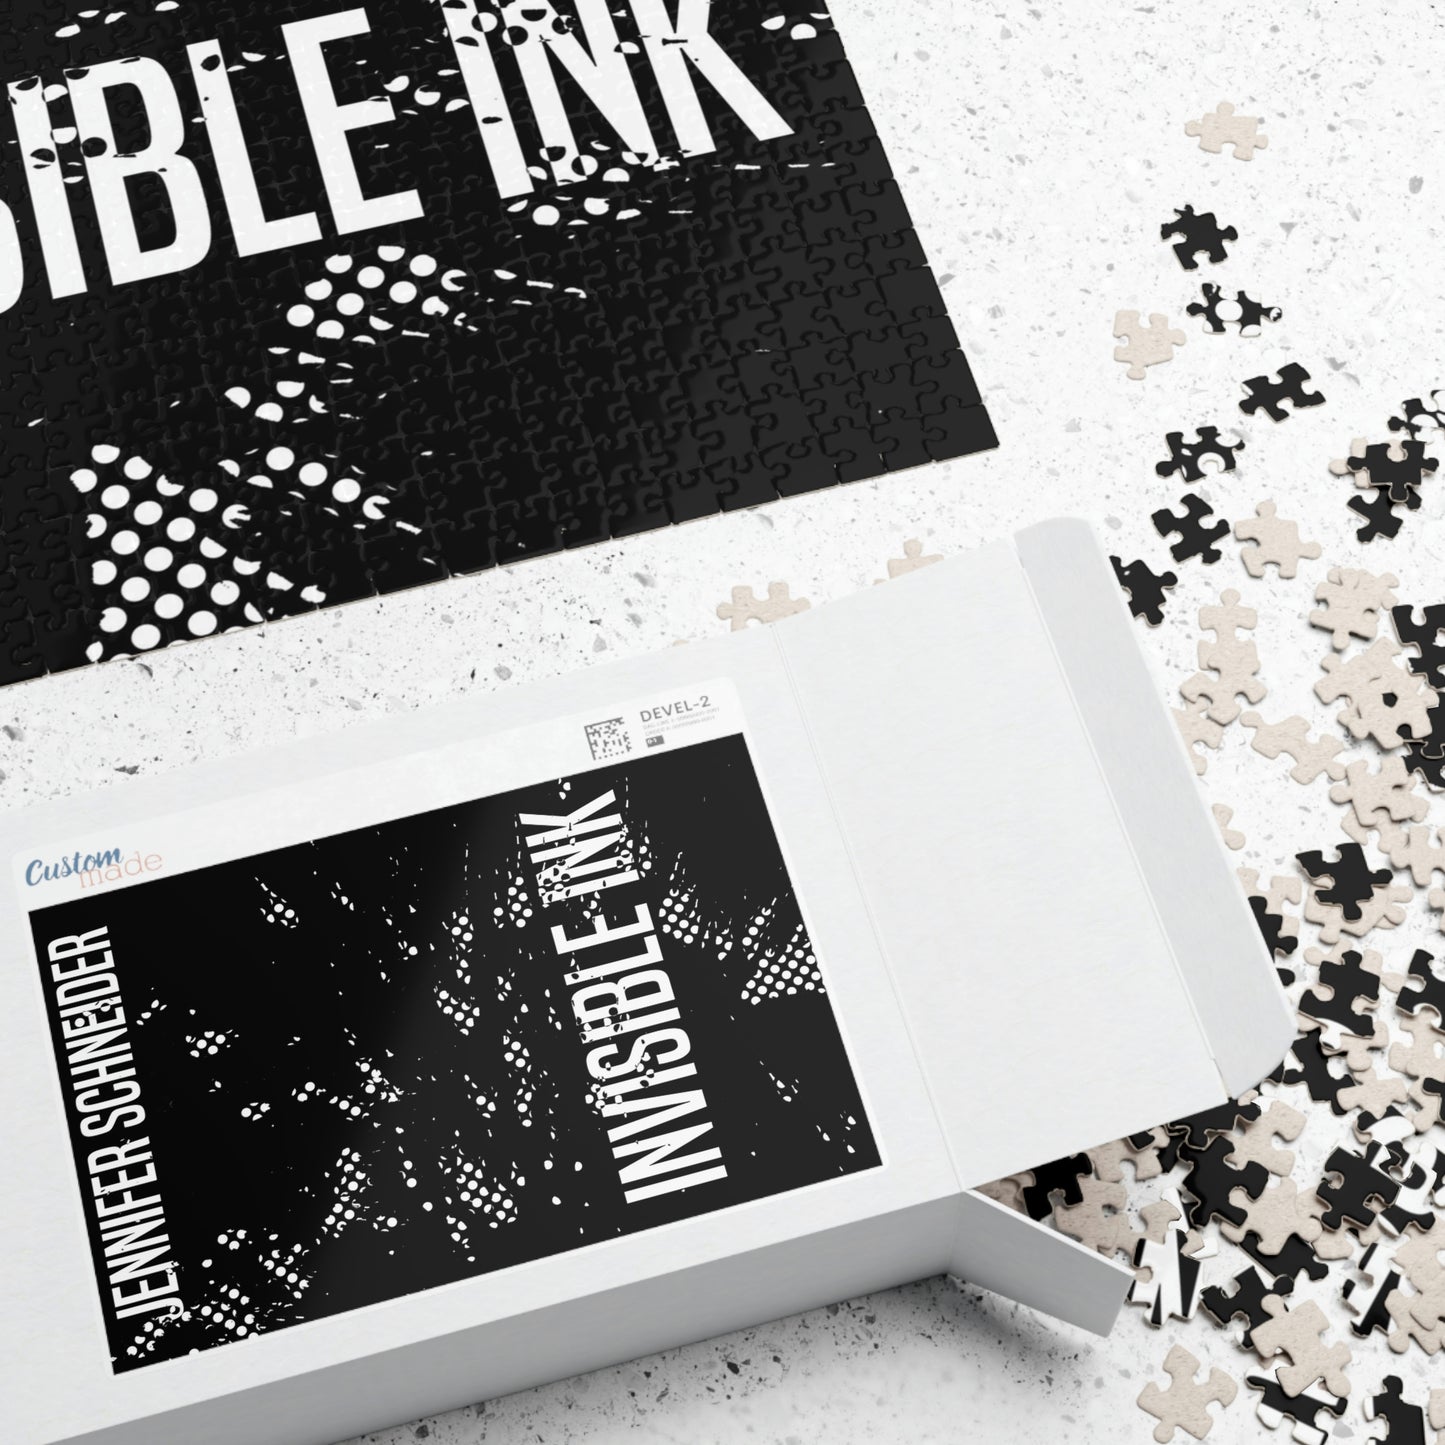 Invisible Ink - 1000 Piece Jigsaw Puzzle